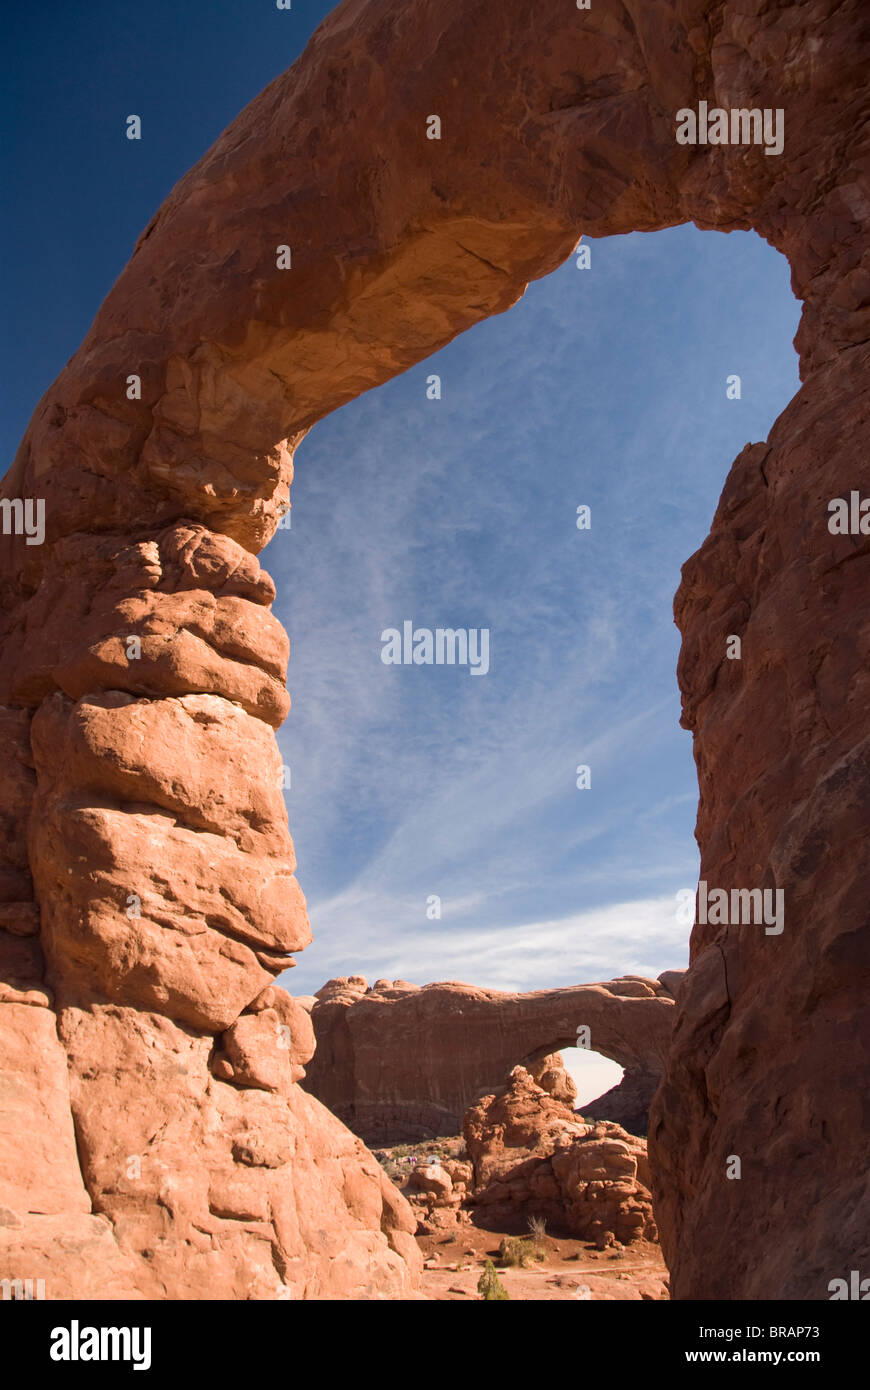 Turret Arch in the foreground, with North Window Arch in the background, Arches National Park, Utah, United States of America Stock Photo